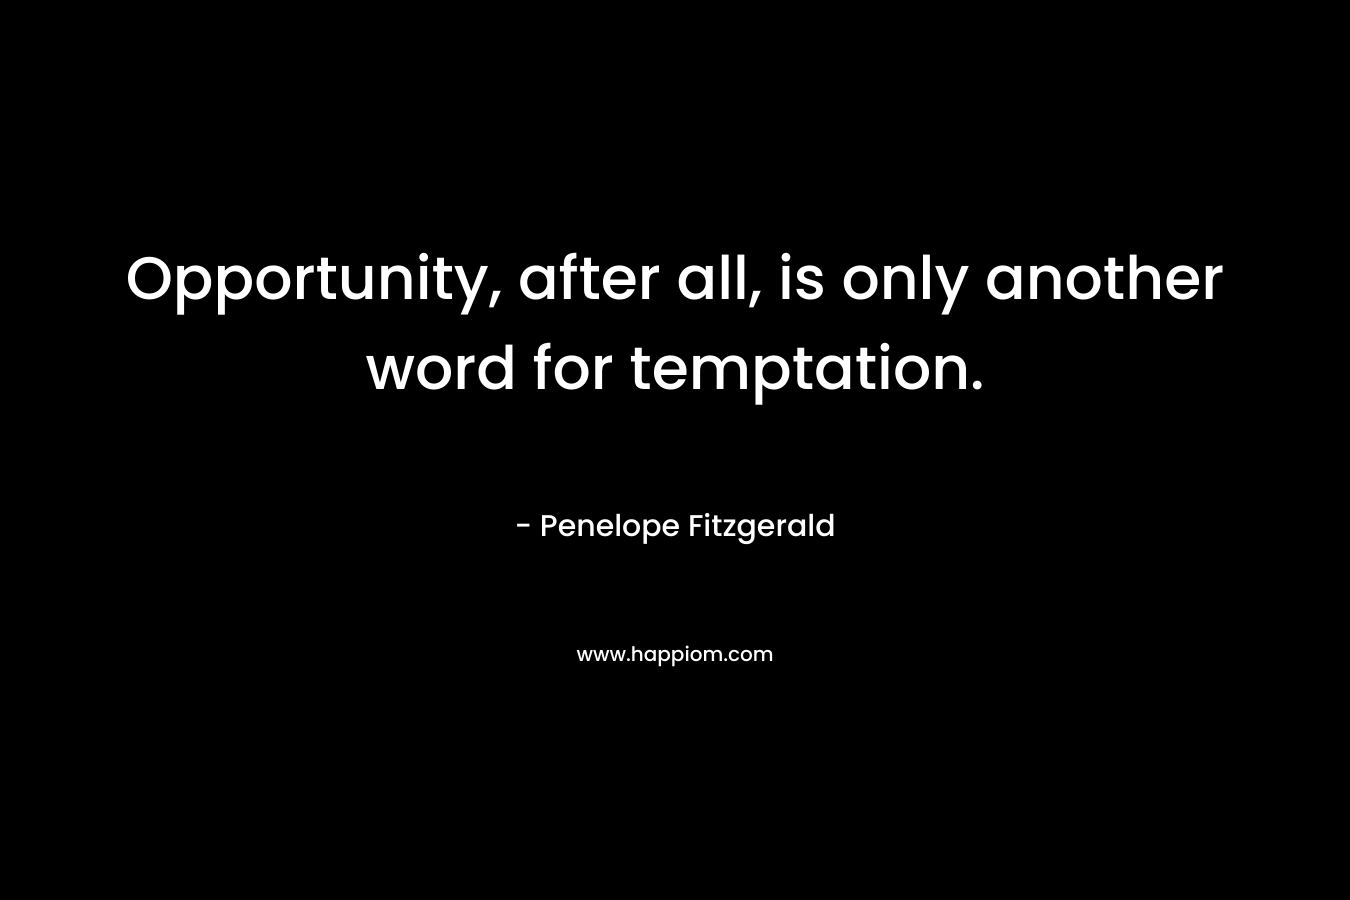 Opportunity, after all, is only another word for temptation. – Penelope Fitzgerald